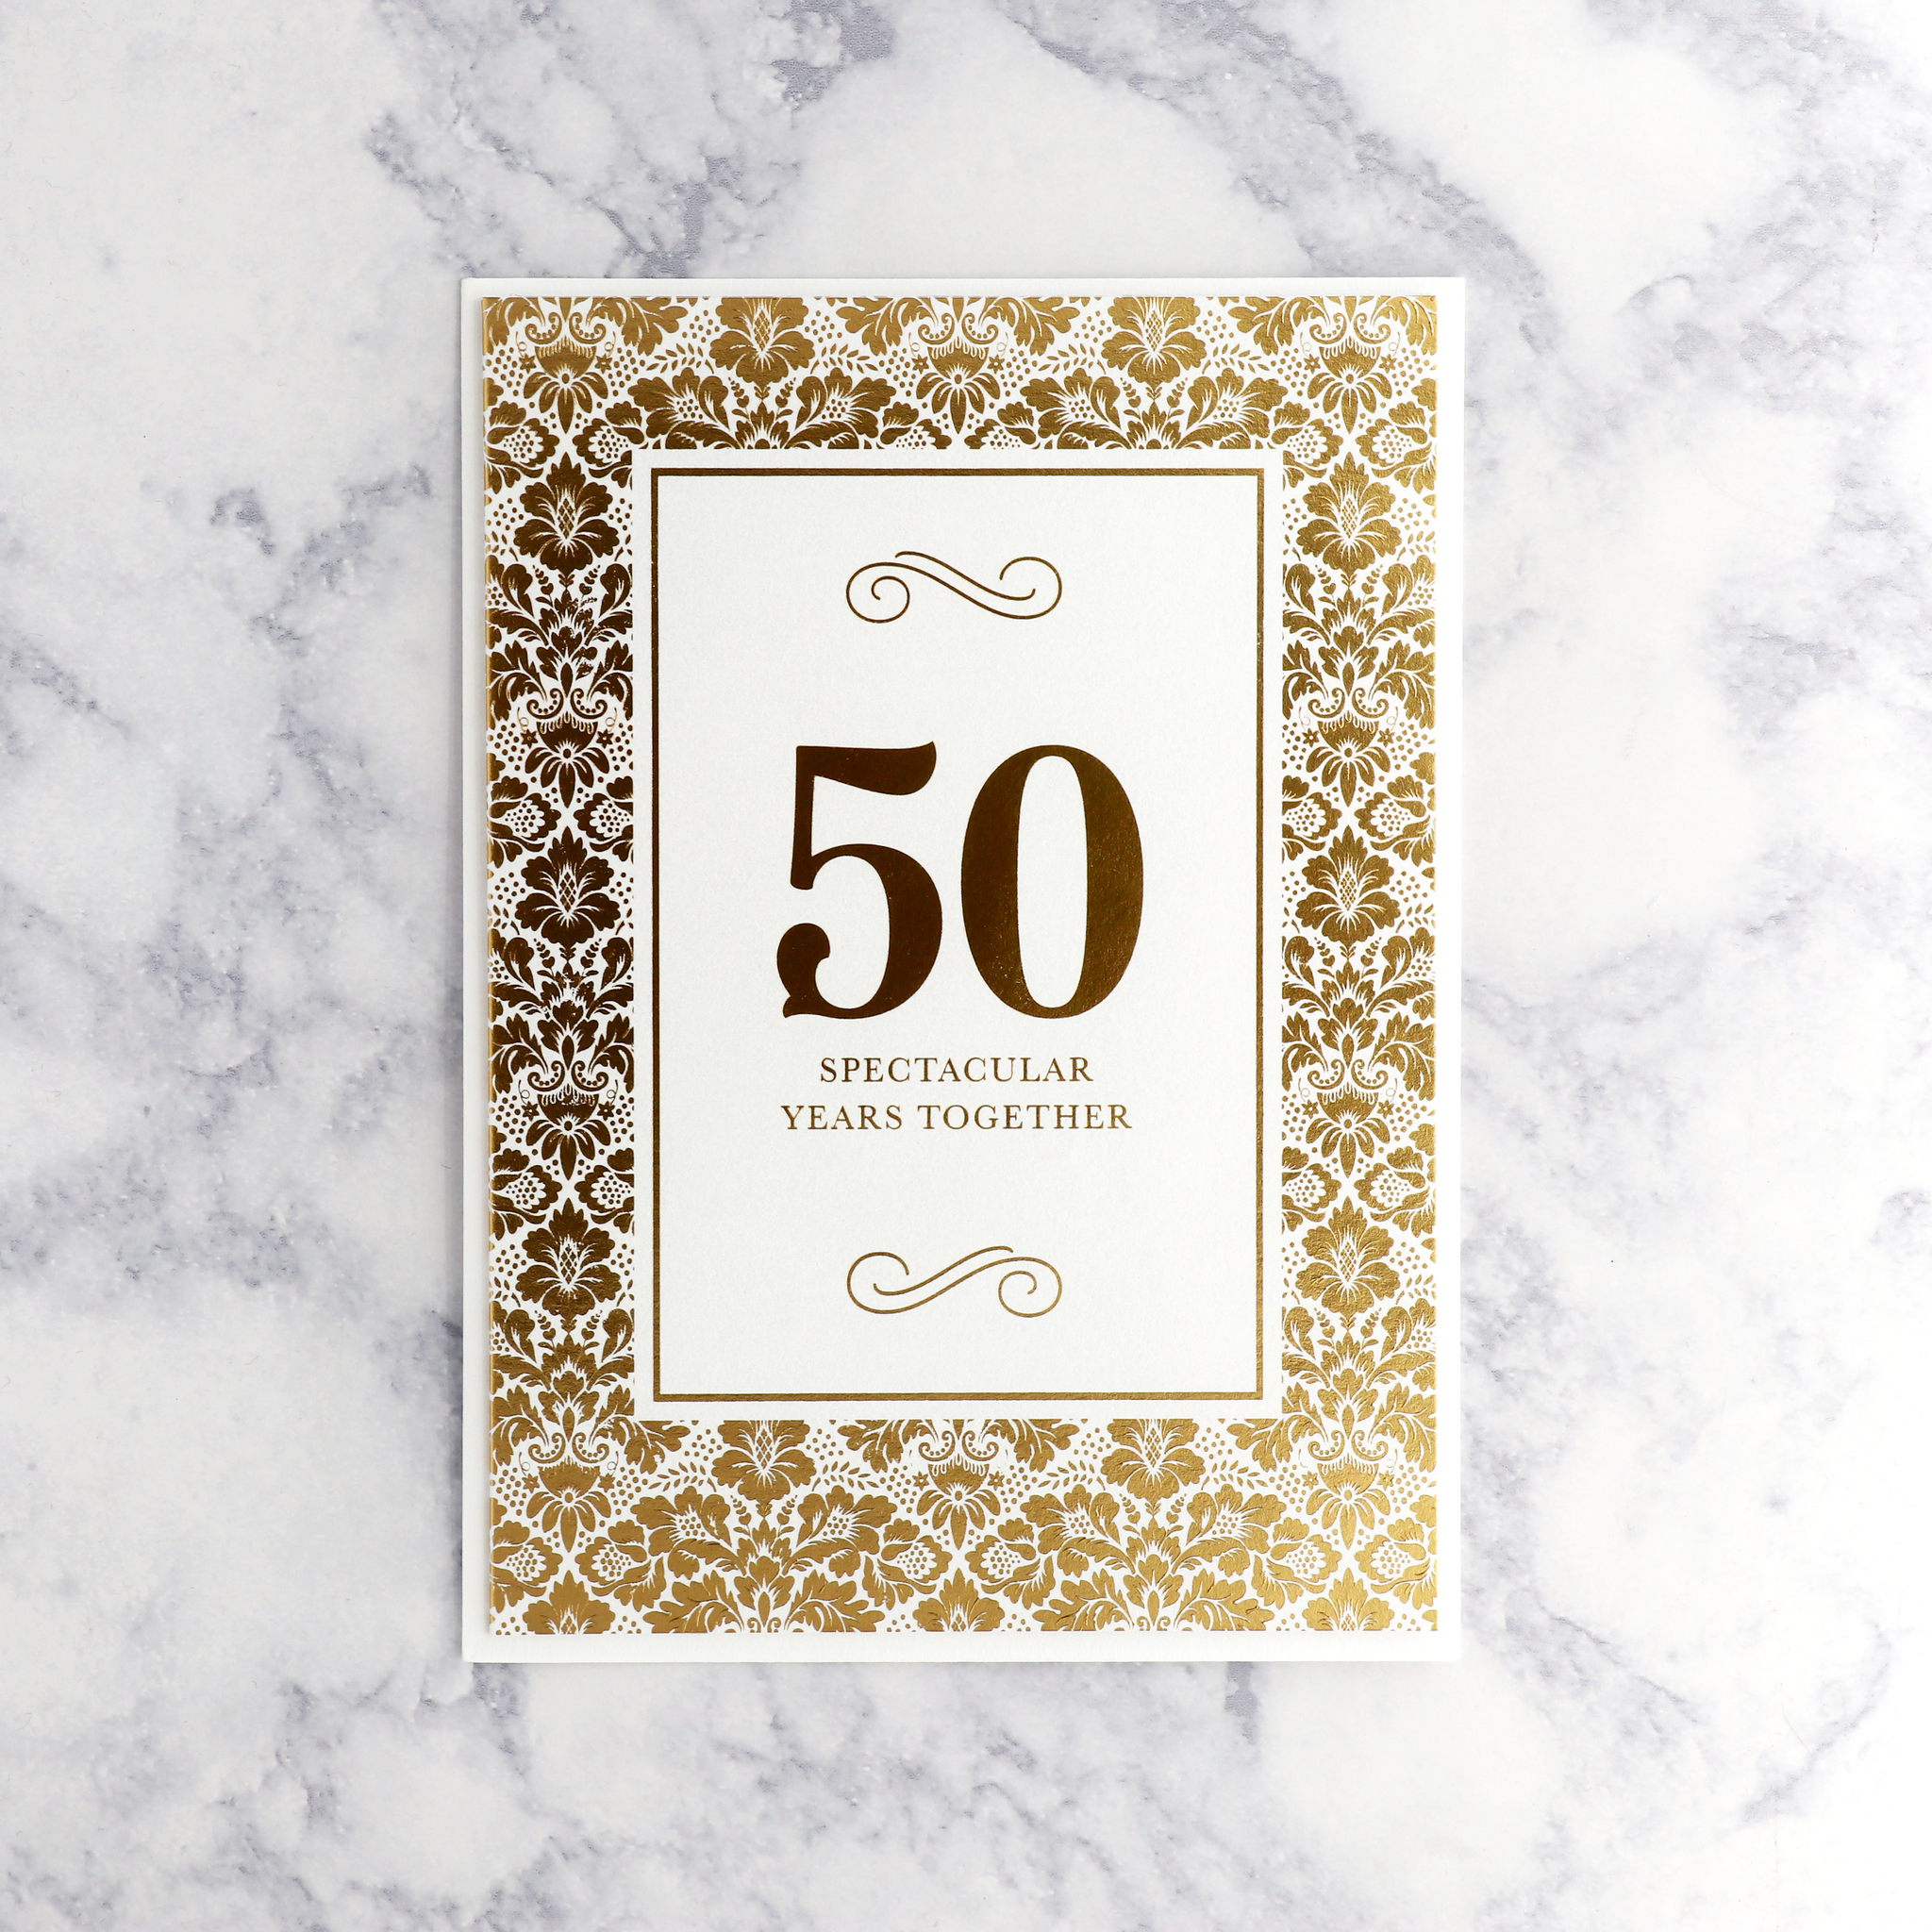 Gold Foil "Spectacular" 50th Anniversary Card